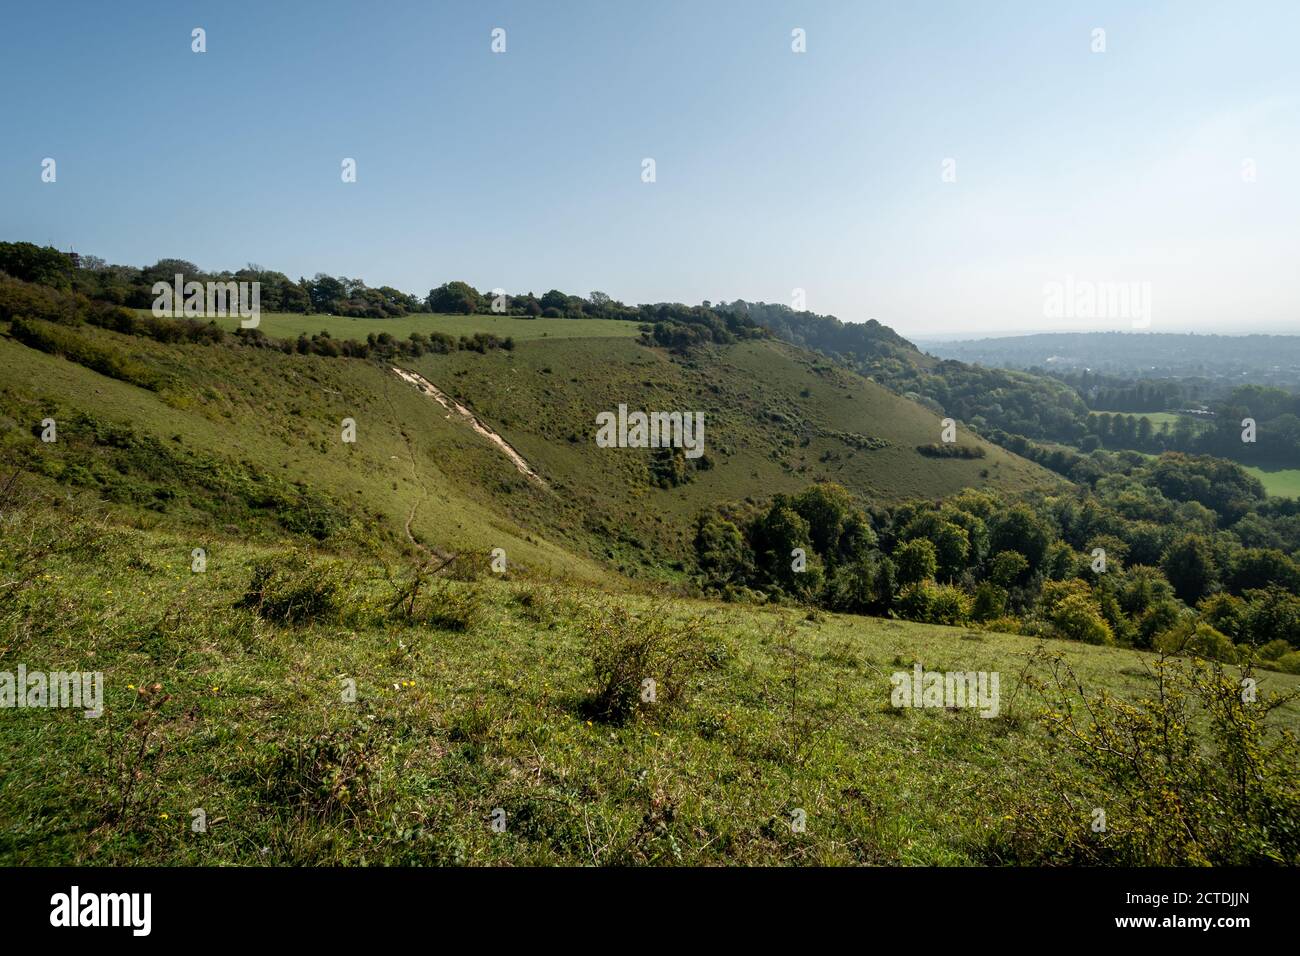 View of the landscape from Colley Hill in the Surrey Hills Area of Outstanding Natural Beauty in September, UK Stock Photo